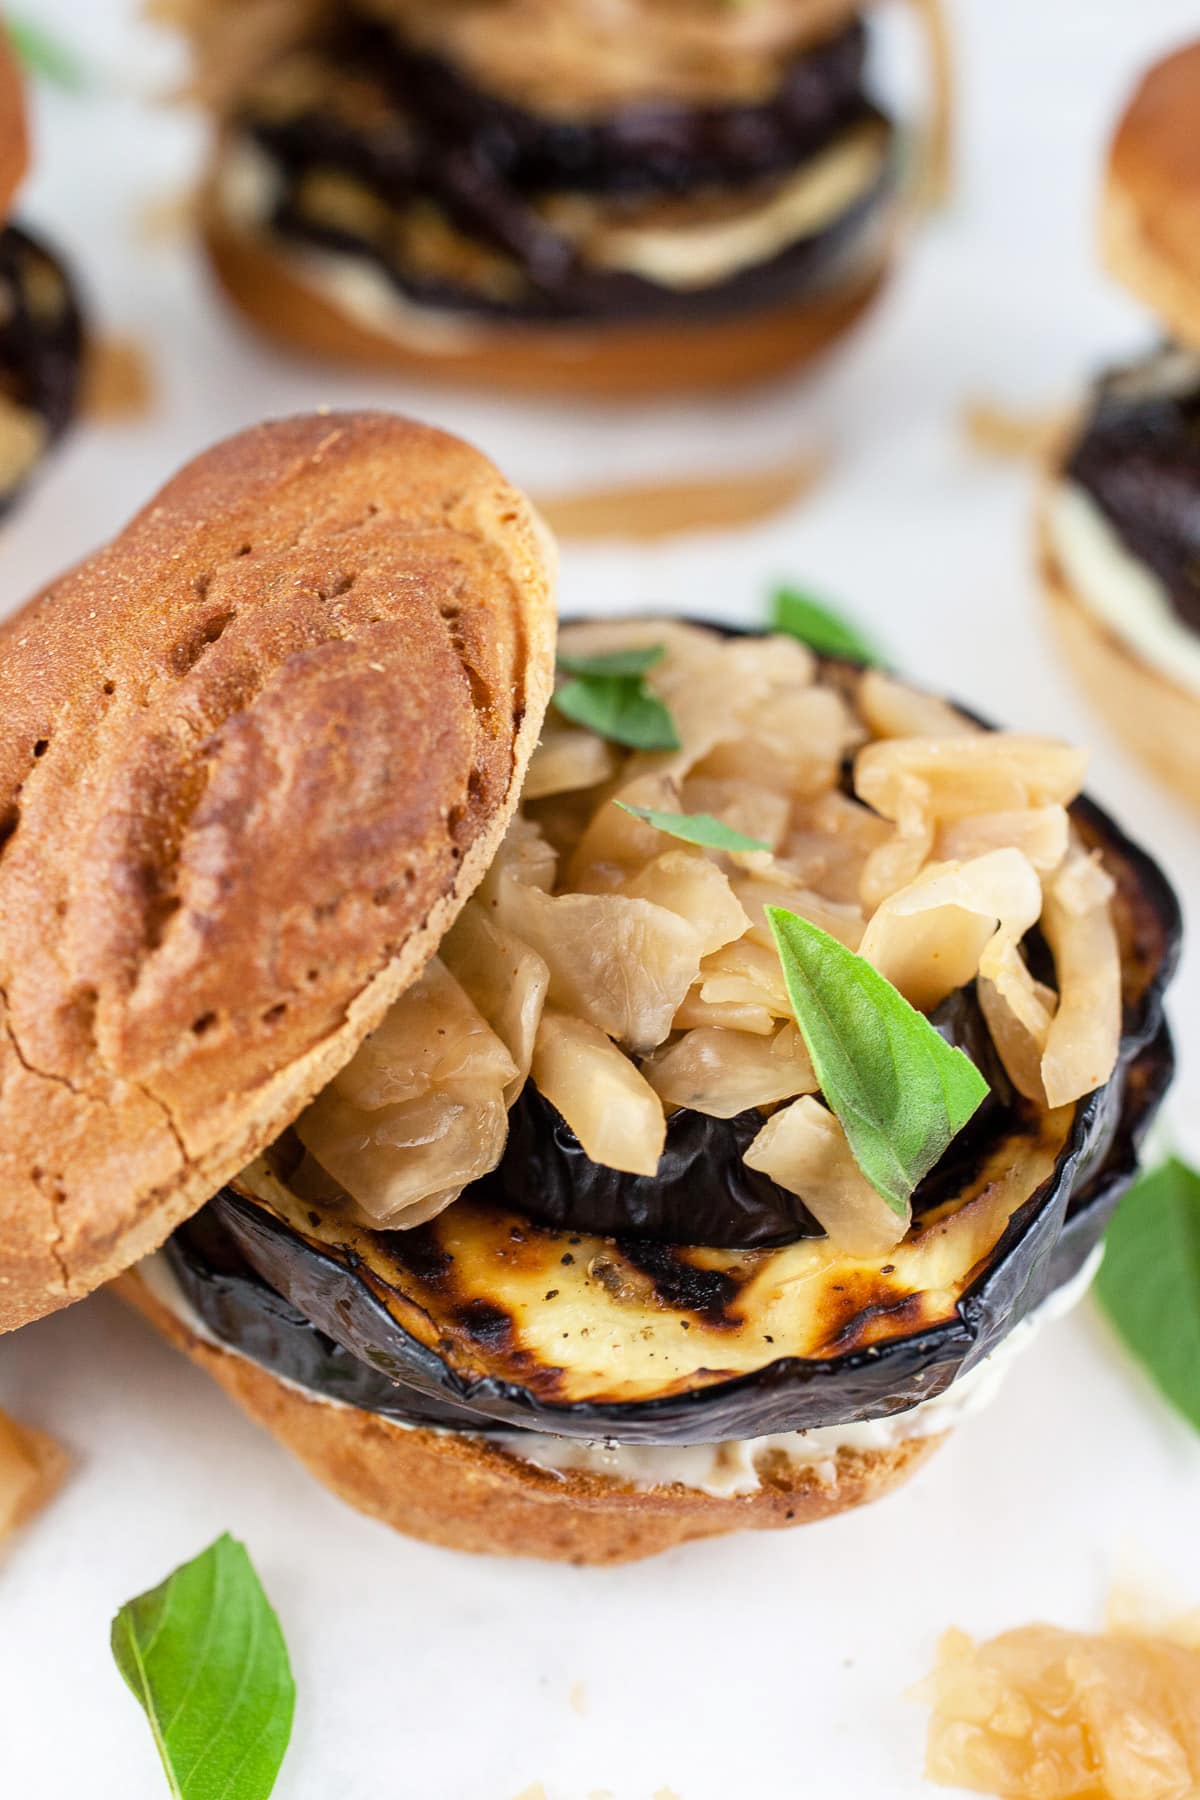 Grilled eggplant sandwiches with kimchi and Thai basil.